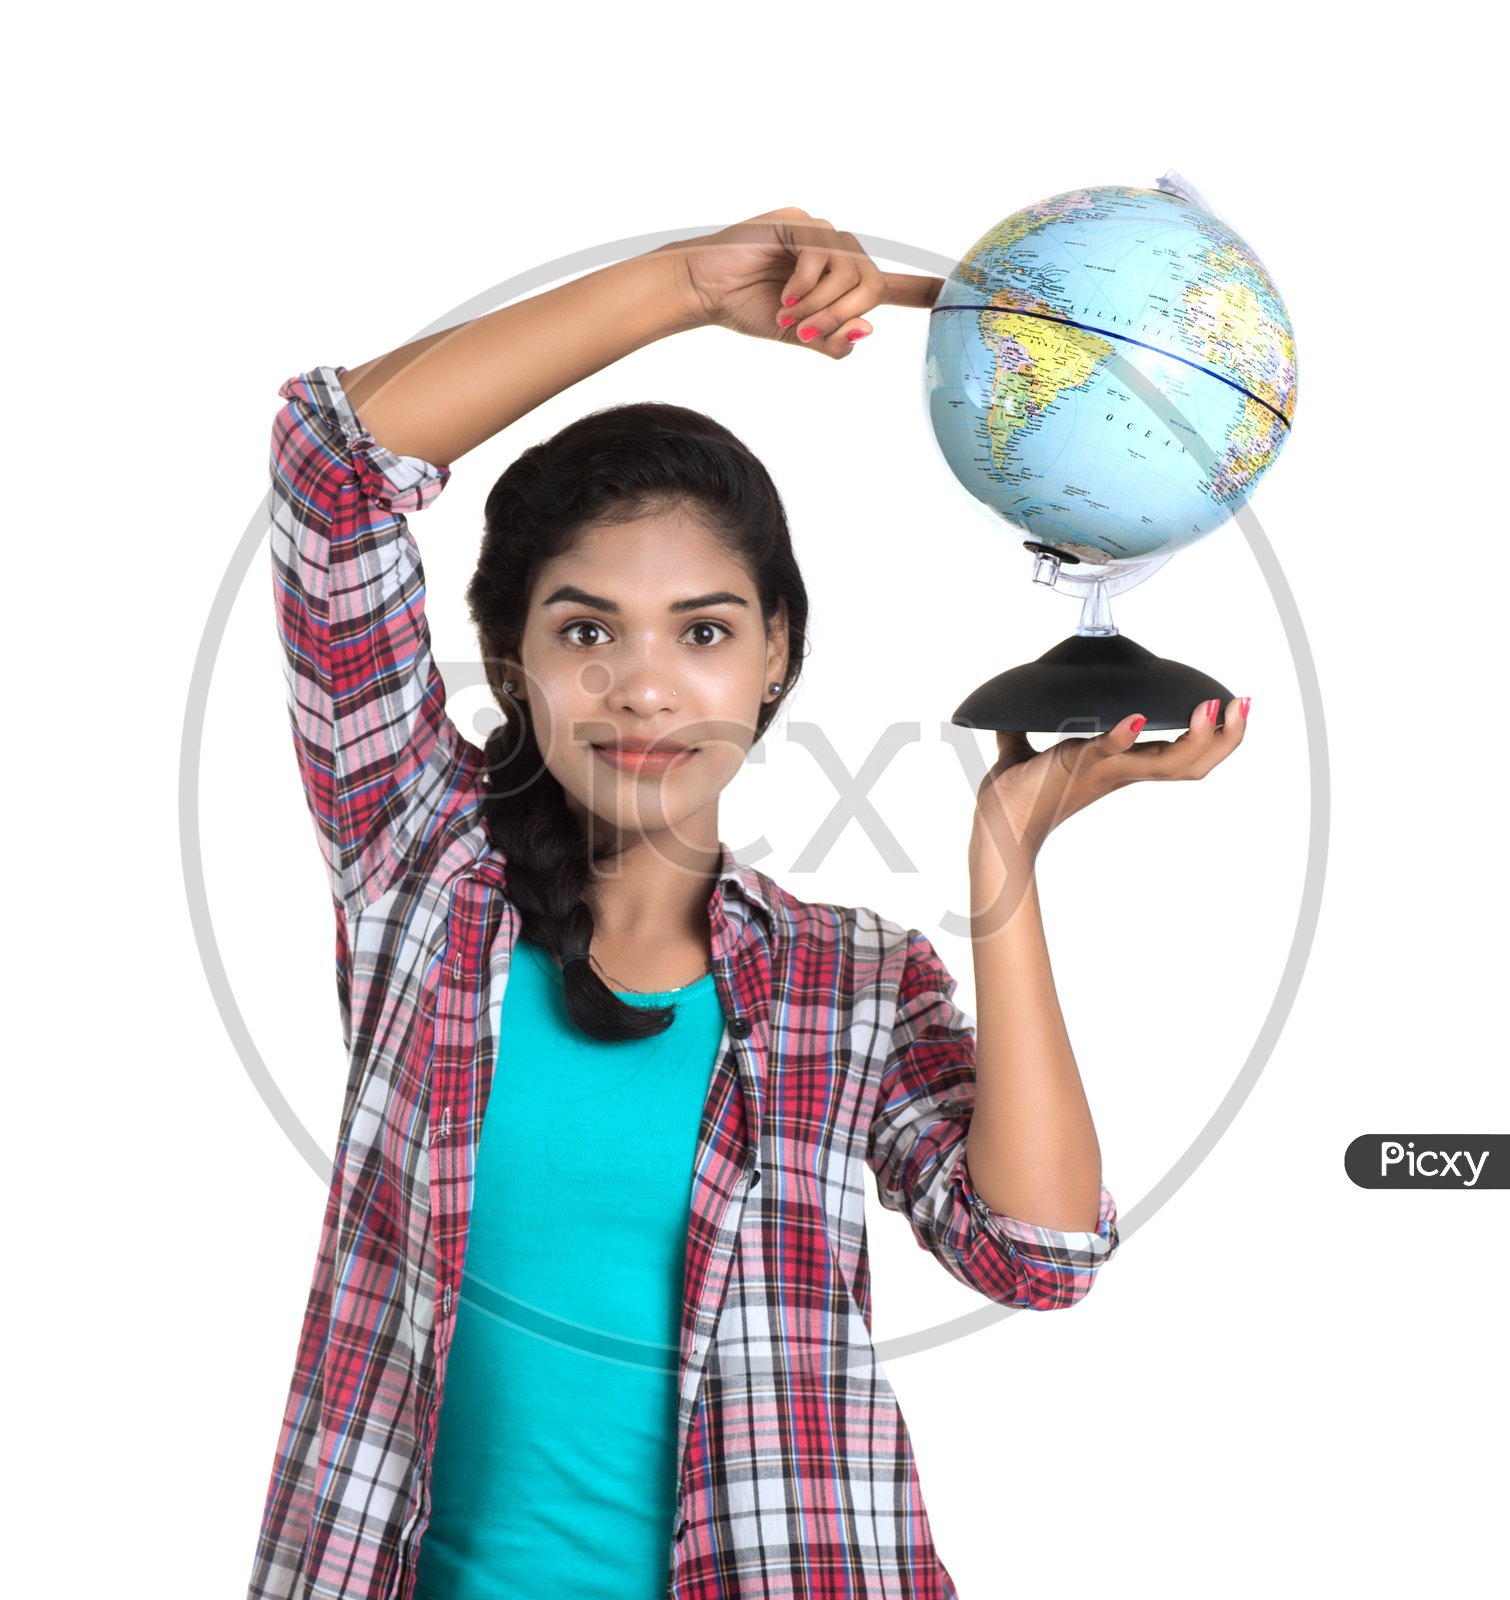 A Pretty Young Girl Holding World Globe In hand And Posing on White Background